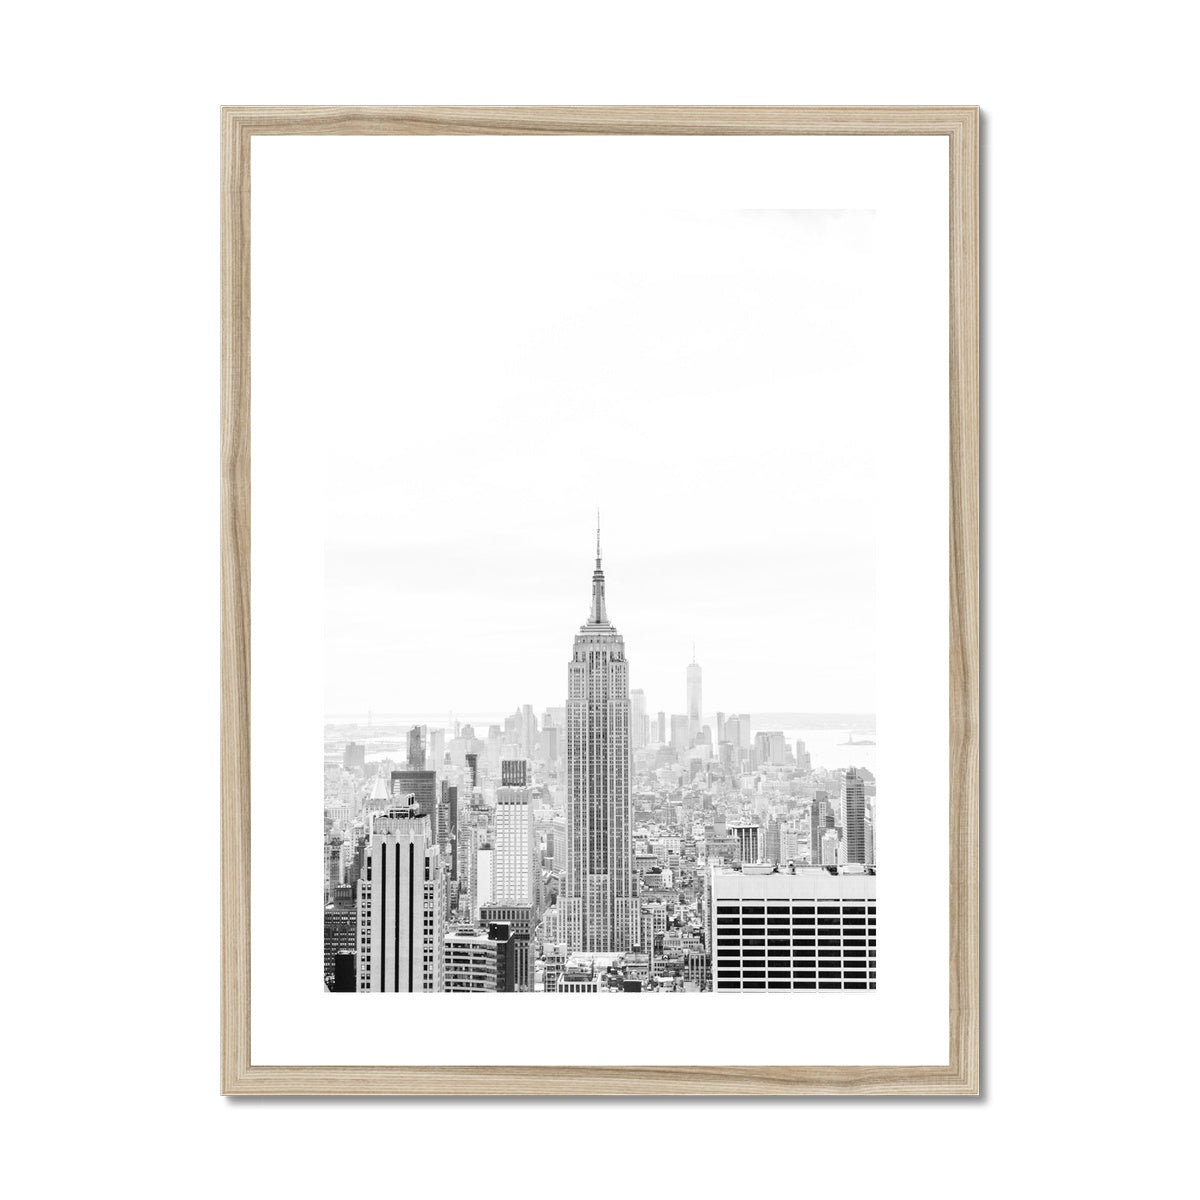 EMPIRE STATE BUILDING BW Framed & Mounted Print